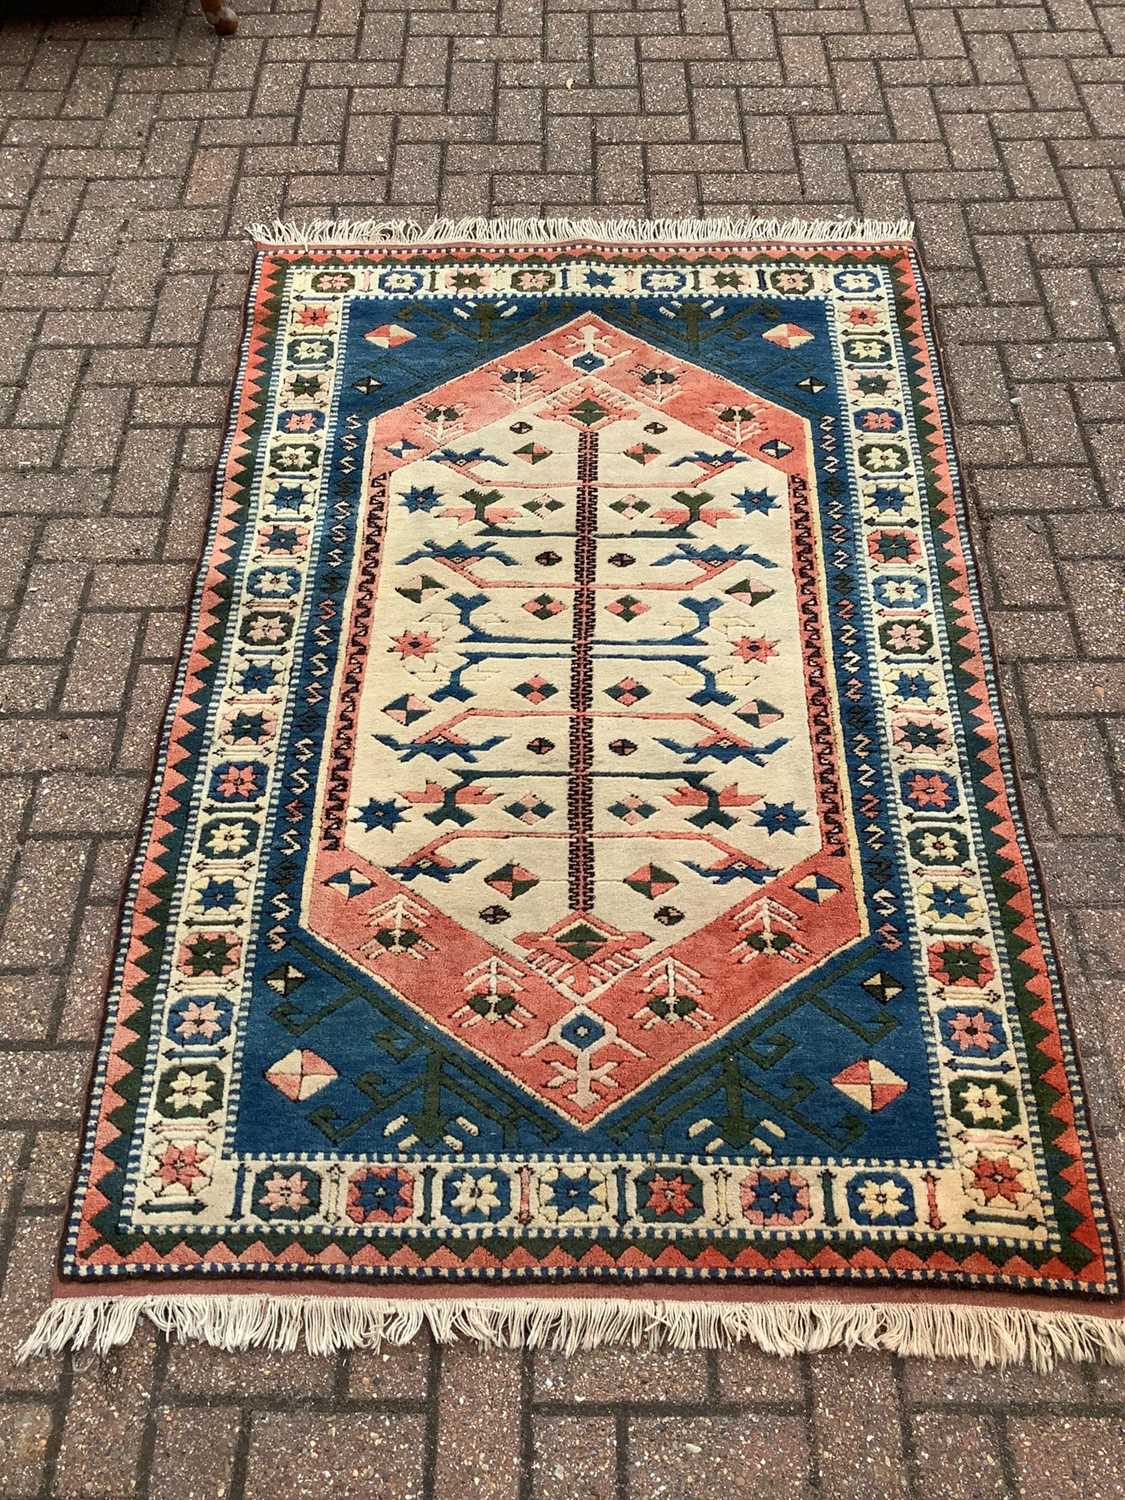 Lot 186 - Eastern rug with geometric decoration on red, blue, greem and cream ground, 188cm x 123cm